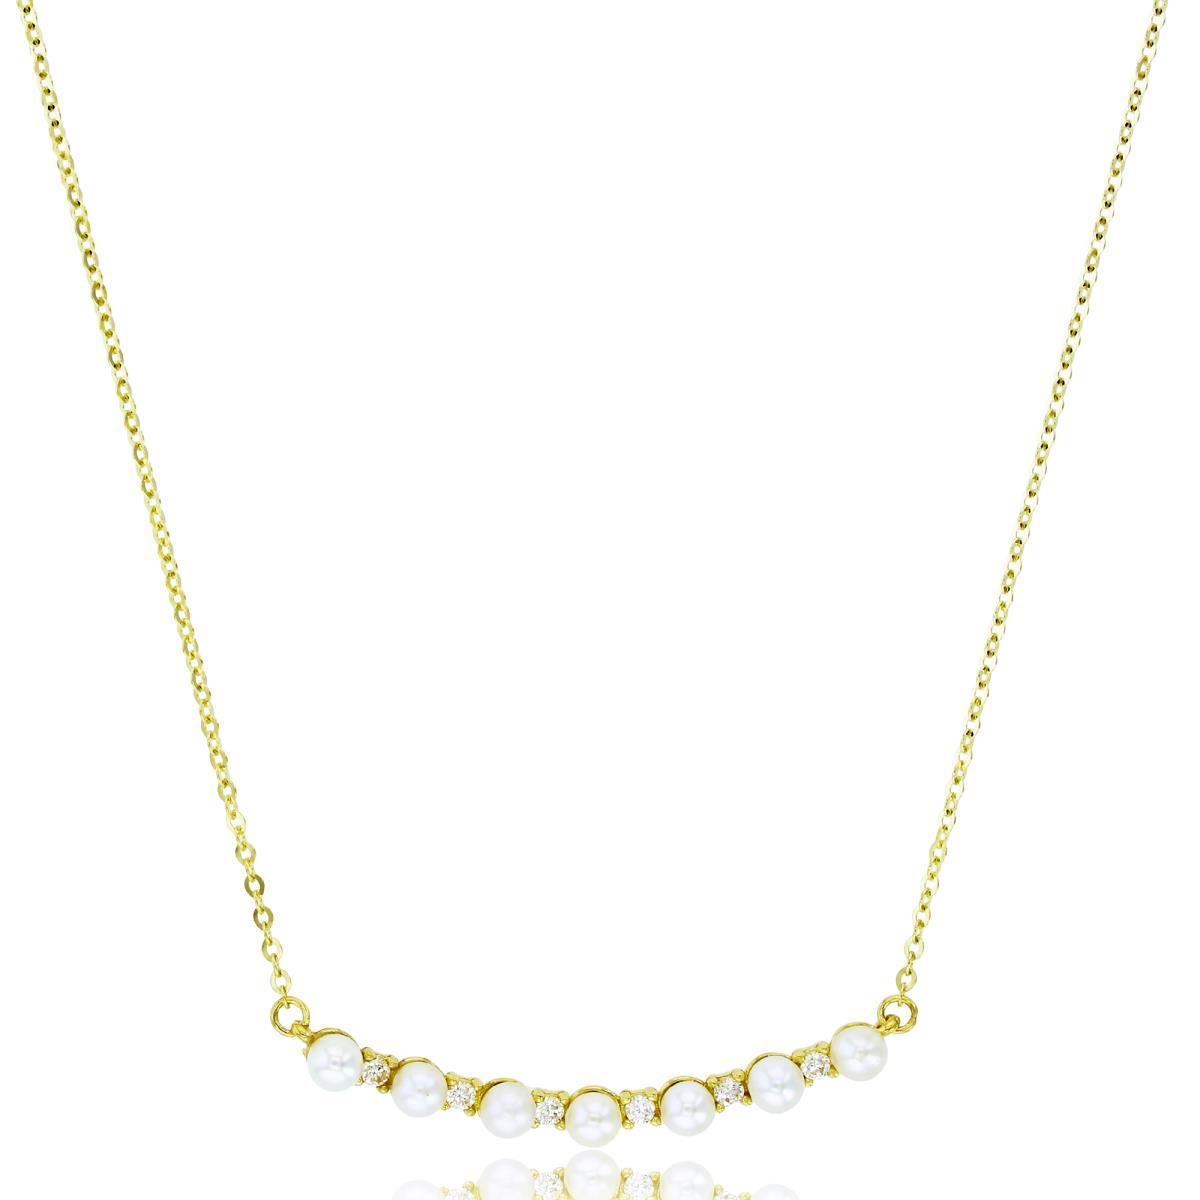 10K Yellow Gold Alternate 3mm Rnd Pearl & White CZ 17+1" Smile Necklace